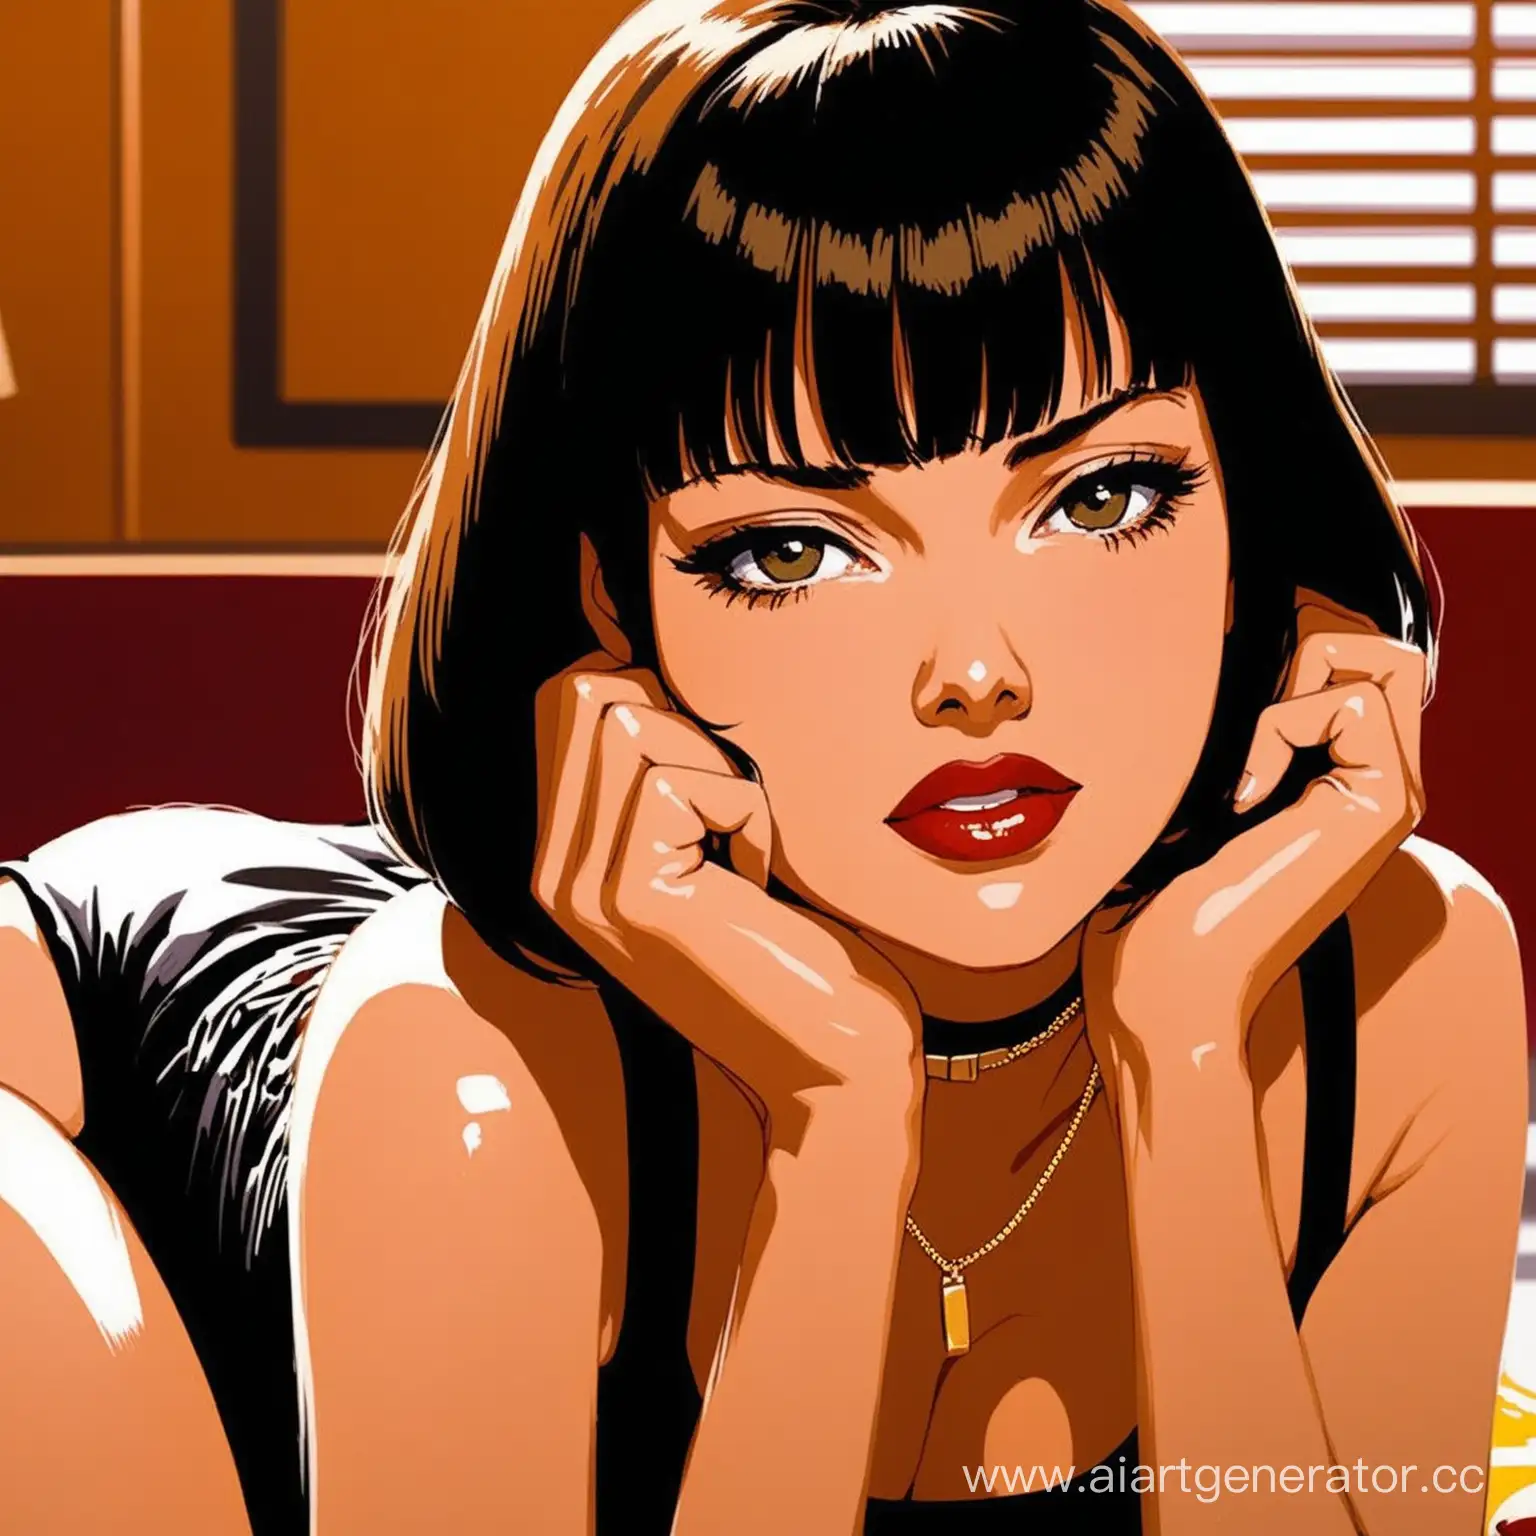 Retro-Diner-Scene-with-Characters-from-the-Film-Pulp-Fiction